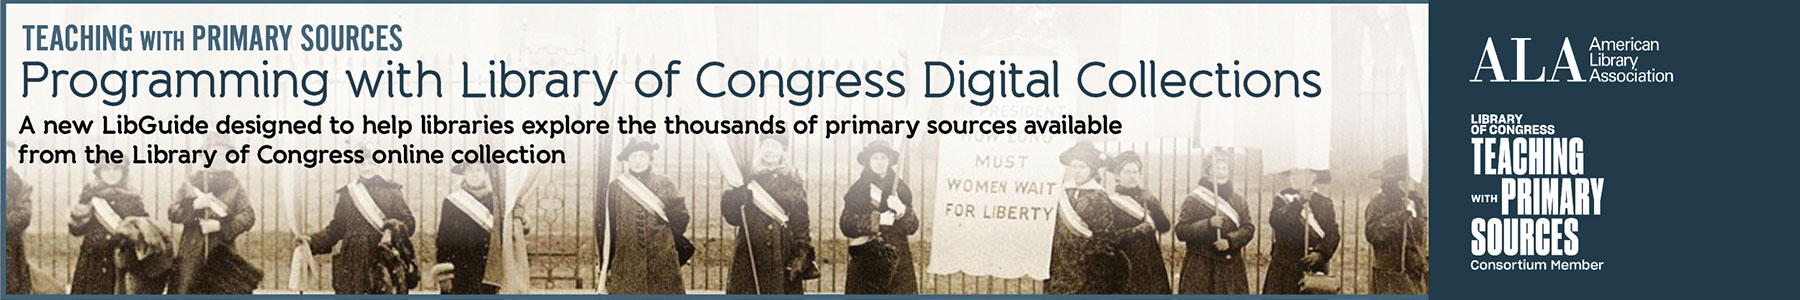 Teaching with Primary Sources: Programming with Library of Congress Digital Collections. A new LibGuide designed to help libraries explore the thousands of primary sources available from the Library of Congress online collection. Ad from ALA's Public Programs Office